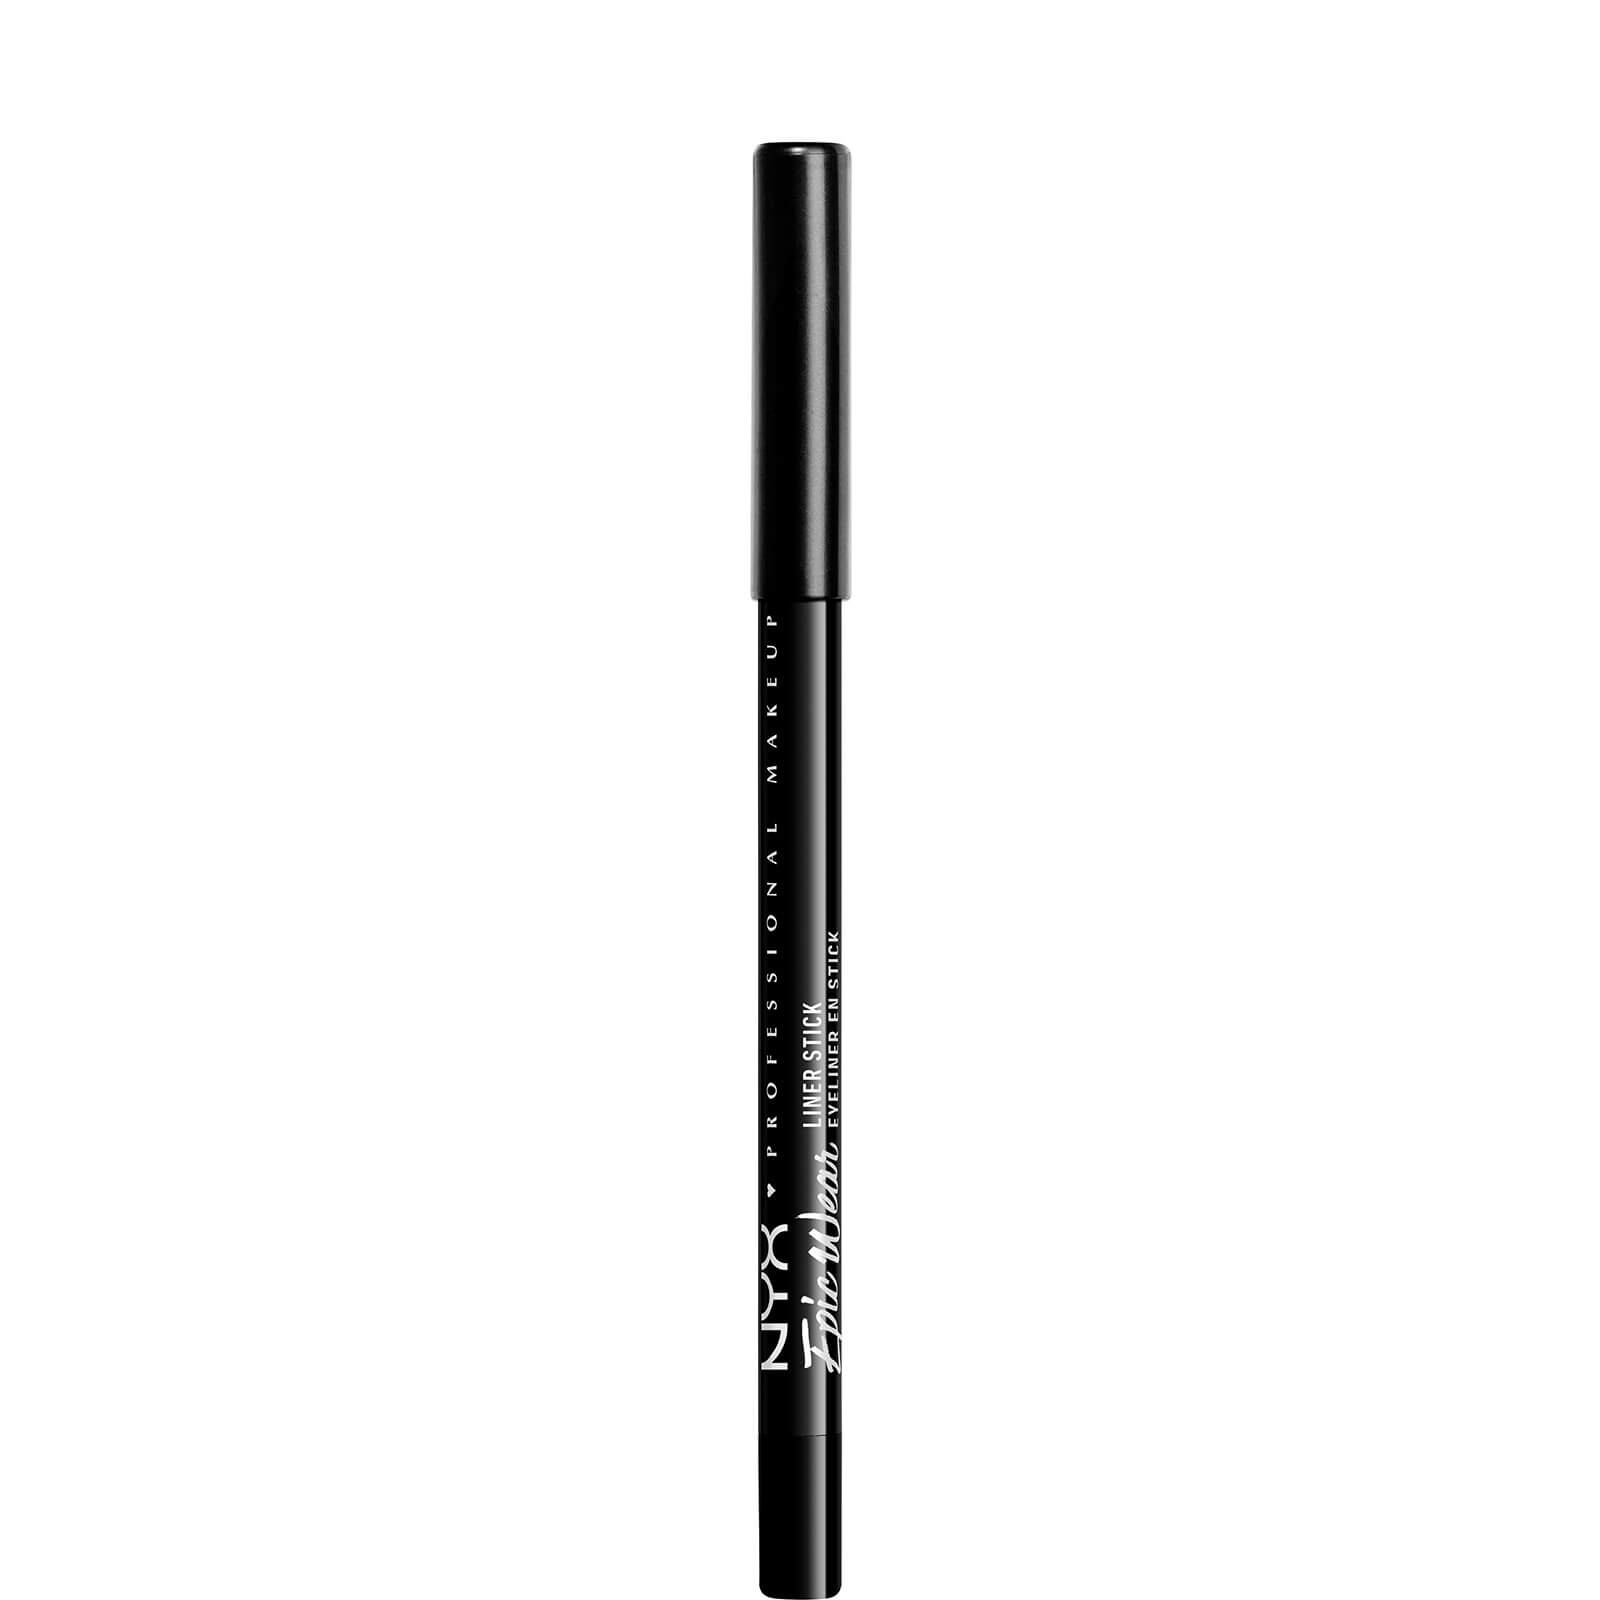 NYX Professional Makeup Epic Wear Long Lasting Liner Stick 1.22g (Various Shades) - Pitch Black